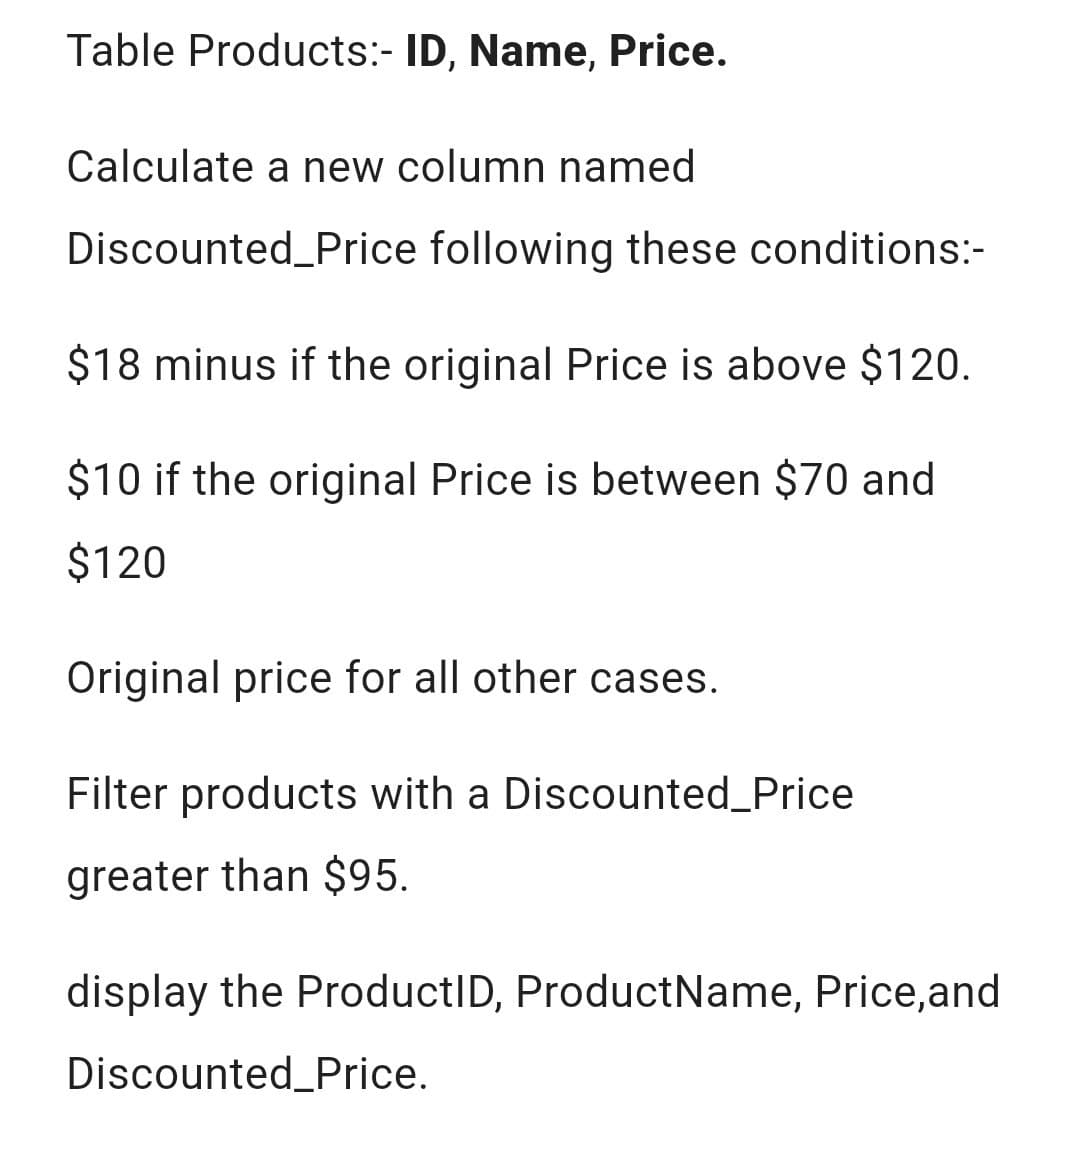 Table Products:- ID, Name, Price.
Calculate a new column named
Discounted_Price following these conditions:-
$18 minus if the original Price is above $120.
$10 if the original Price is between $70 and
$120
Original price for all other cases.
Filter products with a Discounted_Price
greater than $95.
display the ProductID, Product Name, Price, and
Discounted Price.